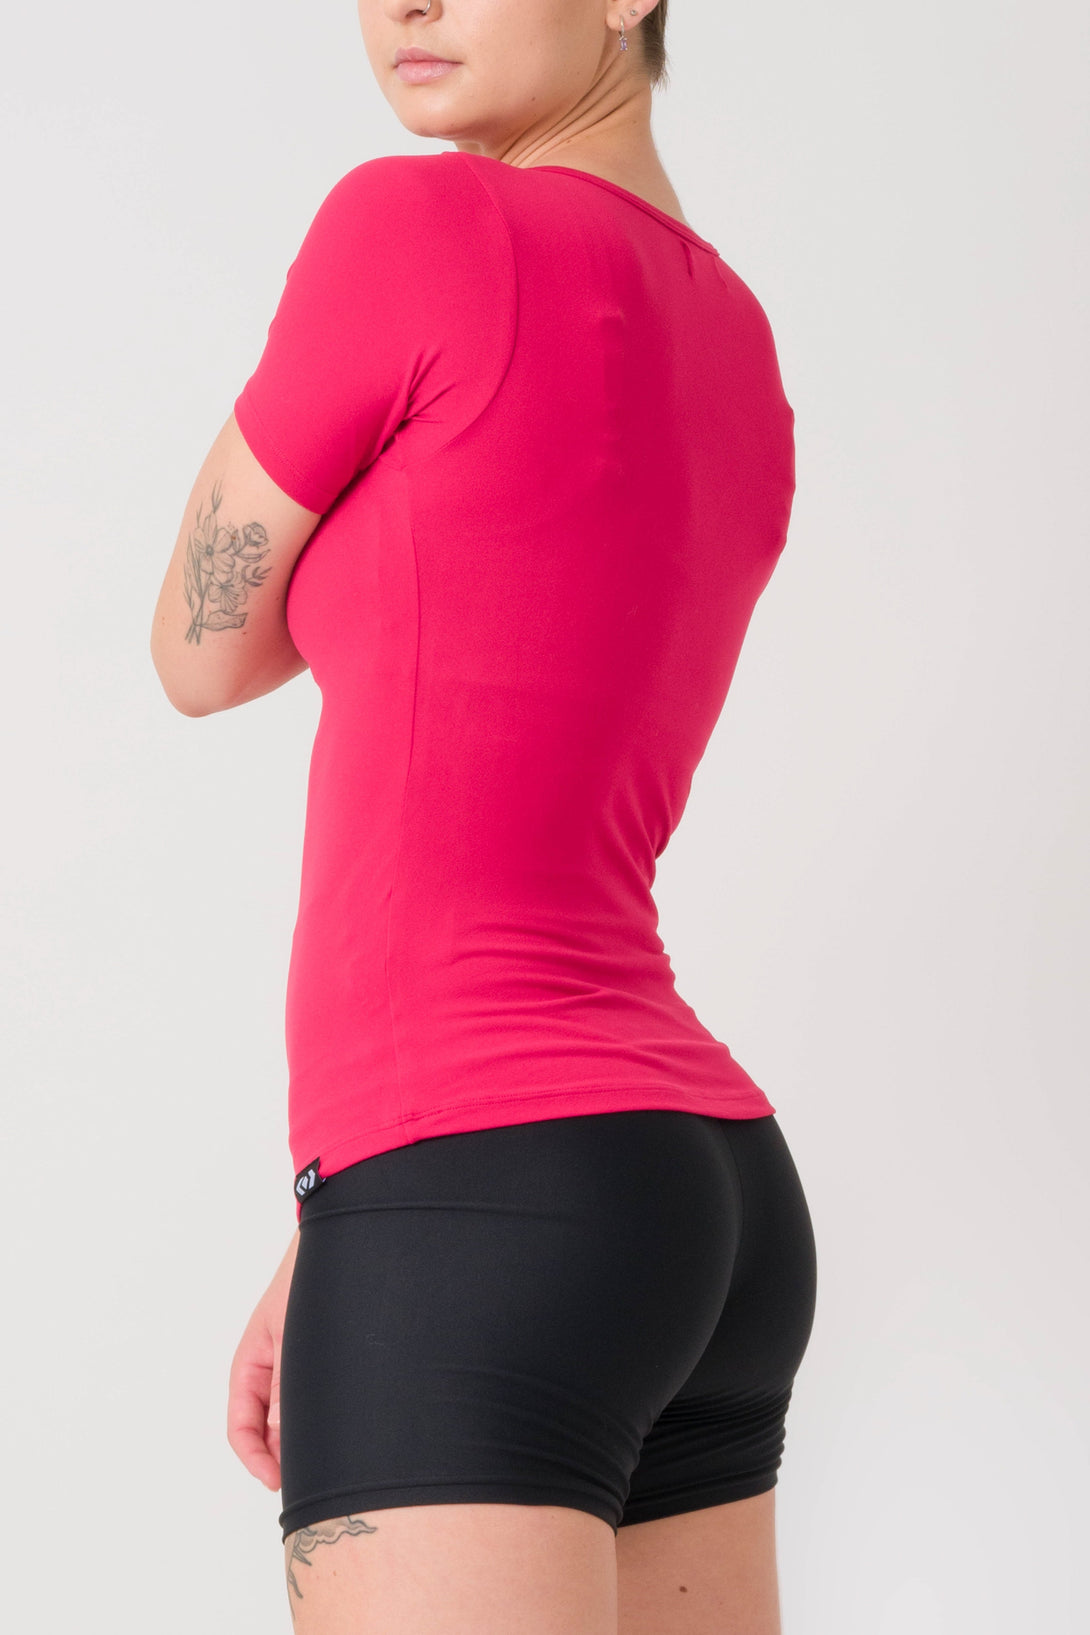 Red Soft To Touch - Fitted Tee-Activewear-Exoticathletica